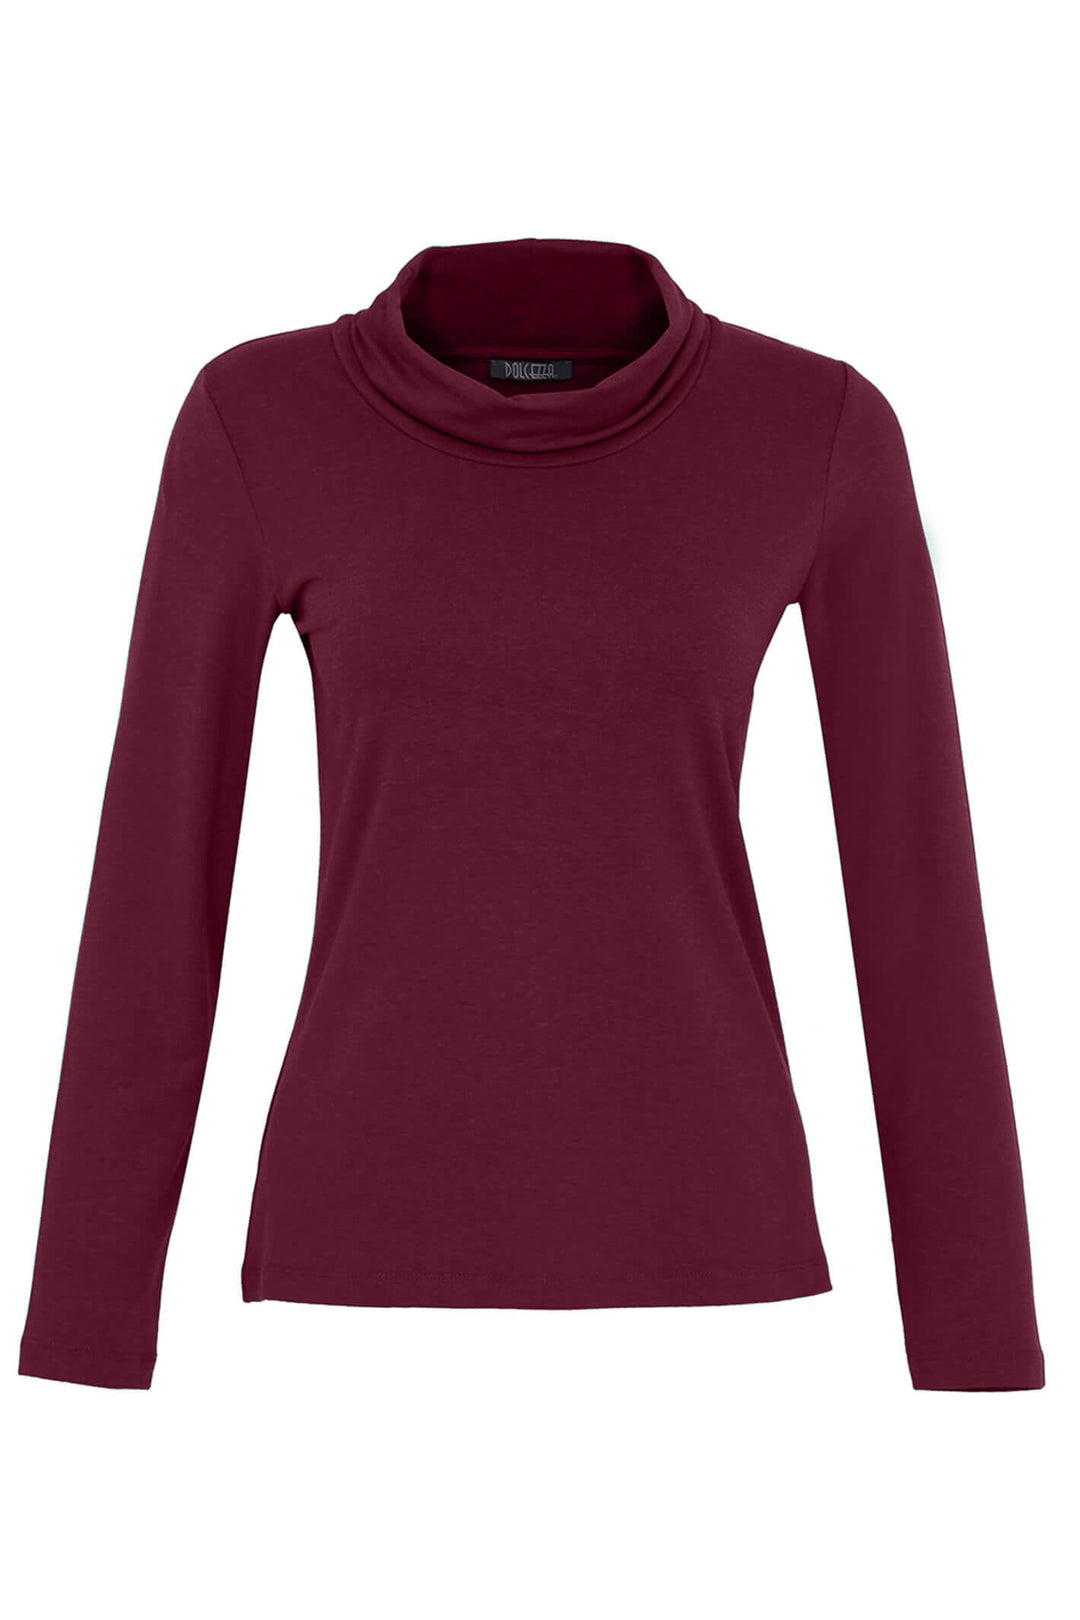 Dolcezza 73554 Burgundy Red Rollneck Long Sleeve T-Shirt Top - Experience Boutique